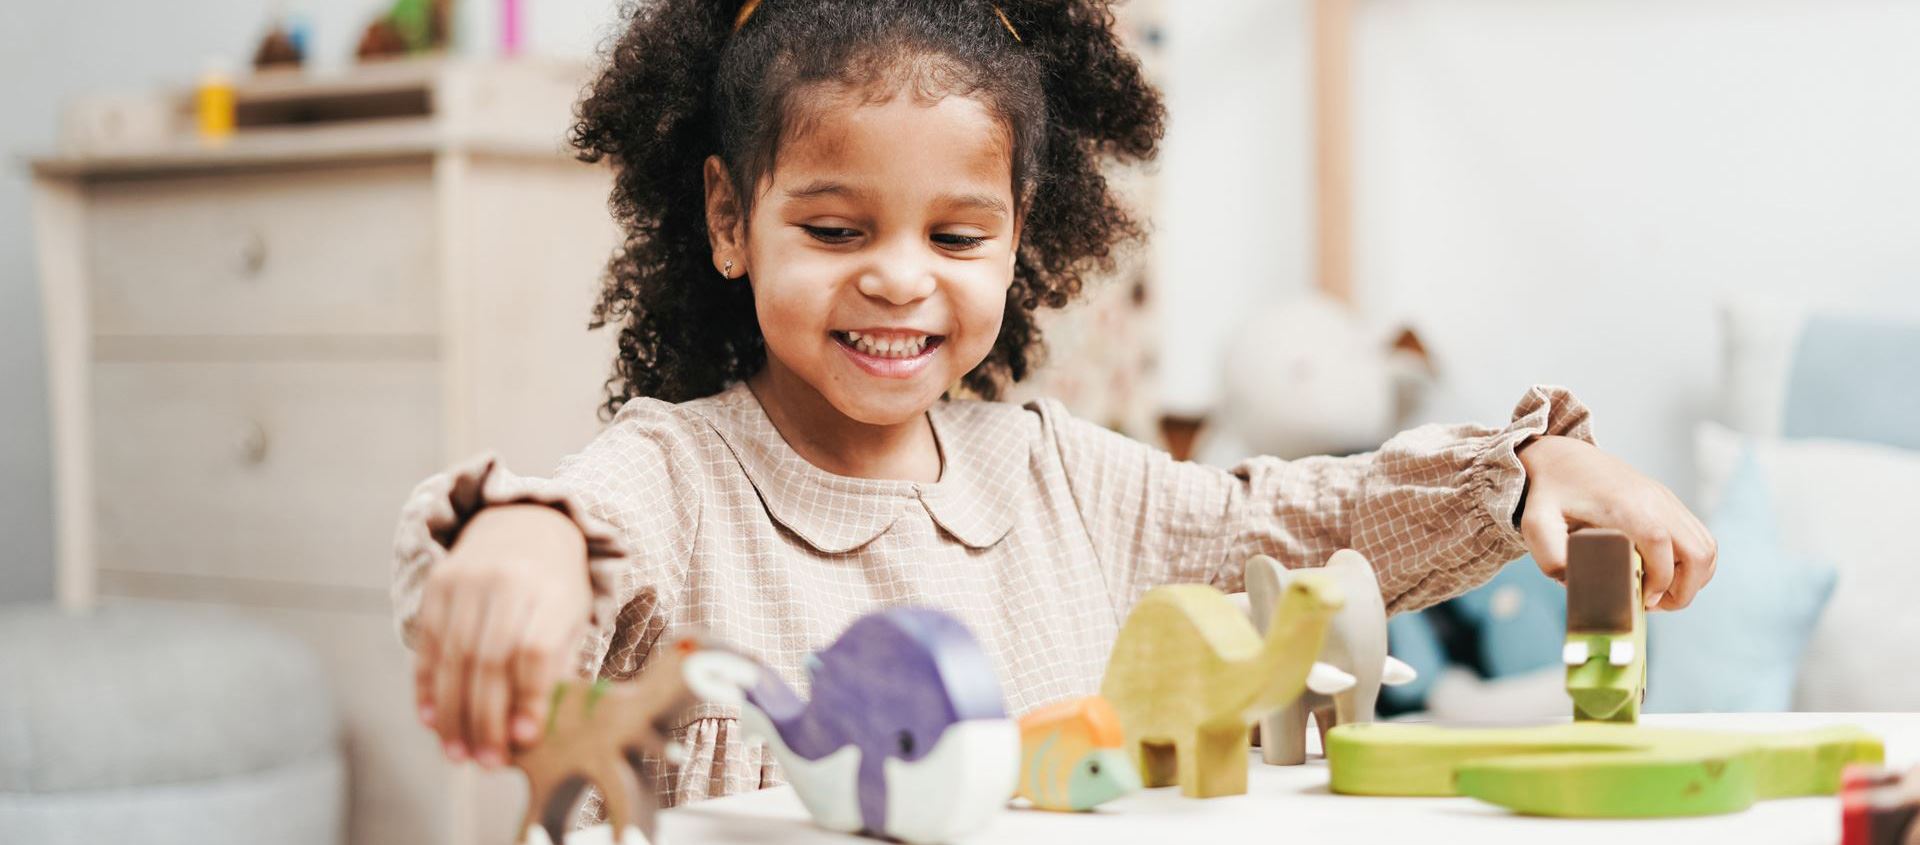 A preschool-aged Black American girl plays with wooden dinosaurs at a table.